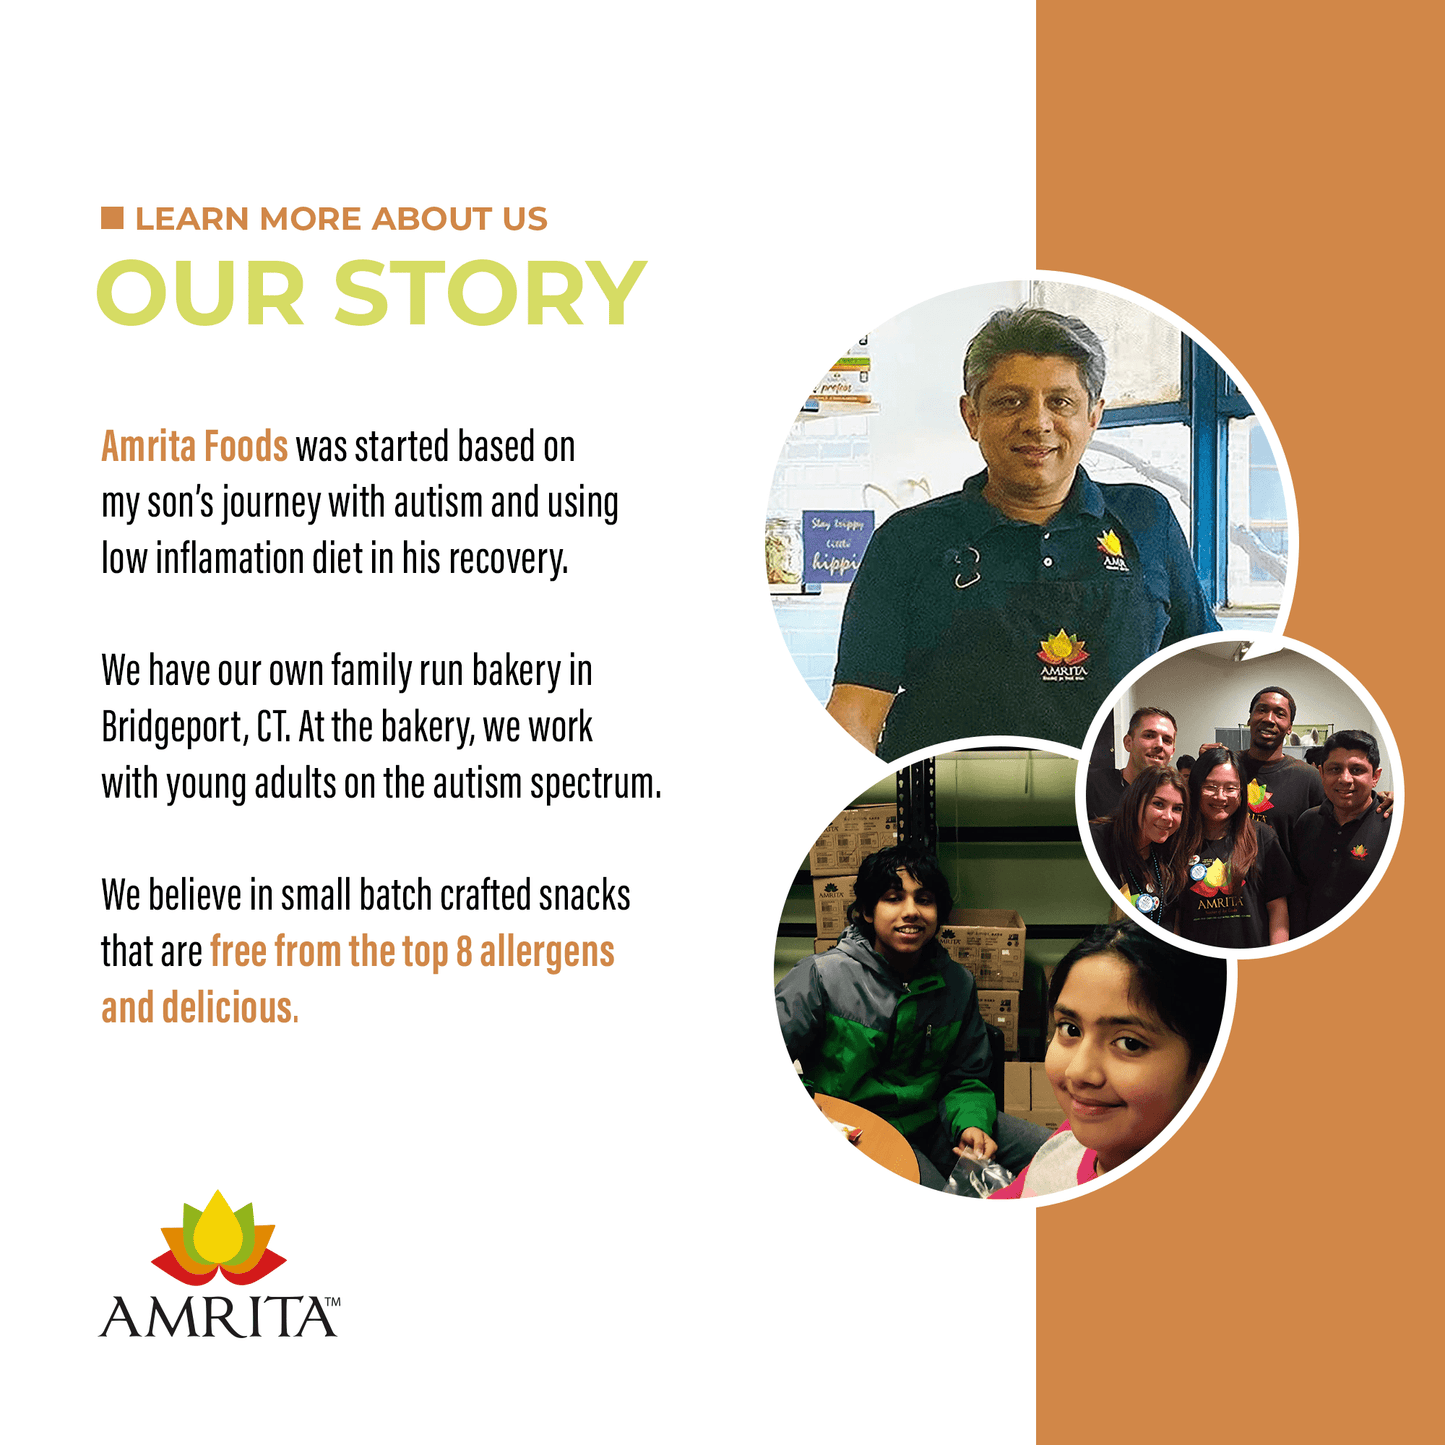 Amrita Foods was started based on my son's journey with autism and using low inflammation diet in his recovery. Our snacks are free from top 8 allergens